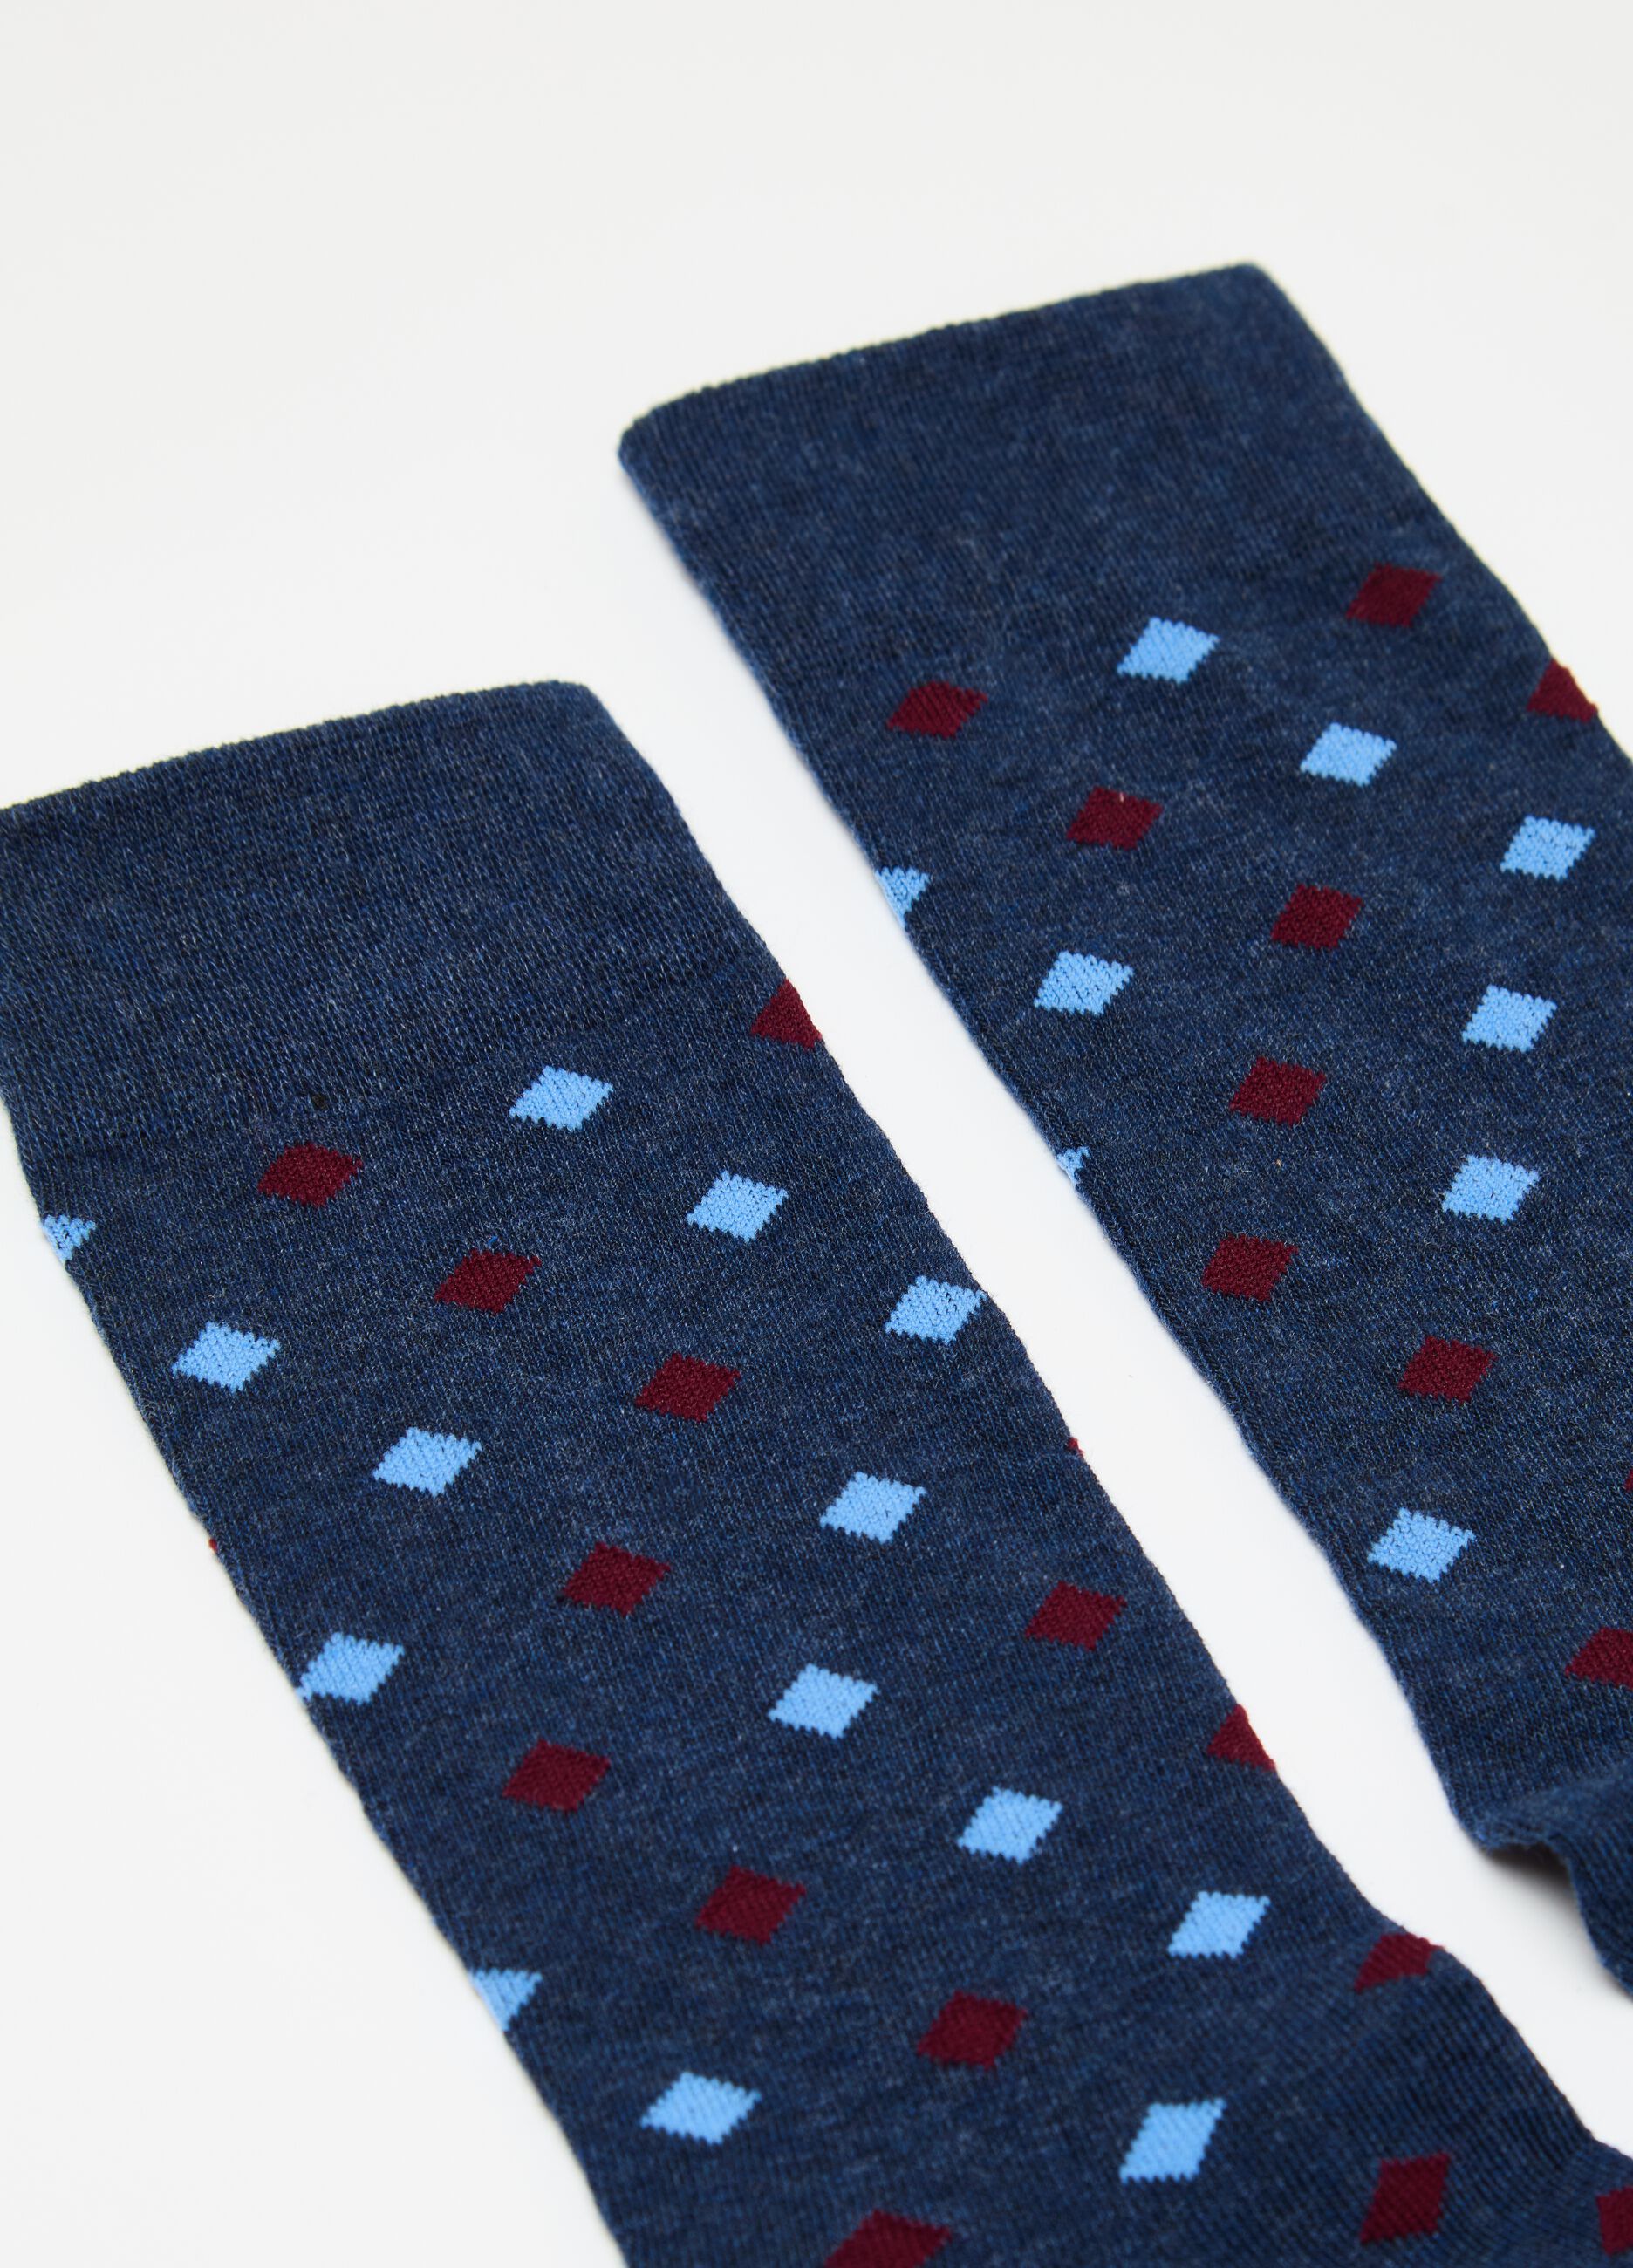 Two-pair pack of mid-length stretch socks